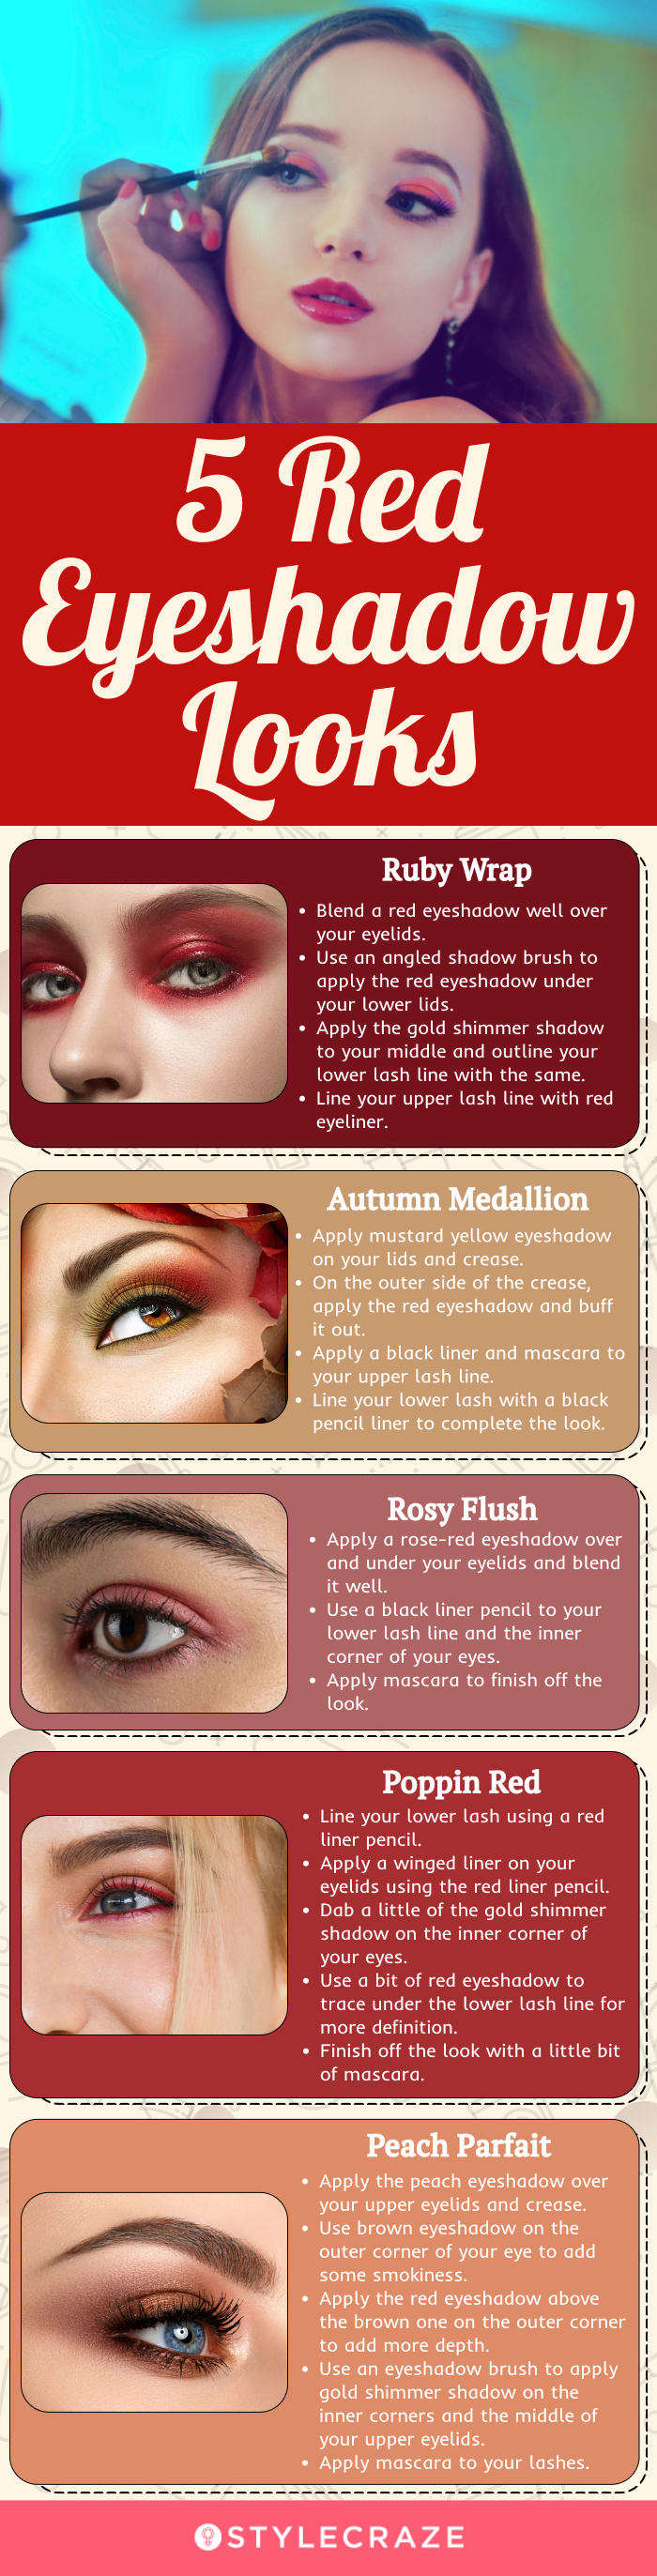 5 red eyeshadow looks (infographic)